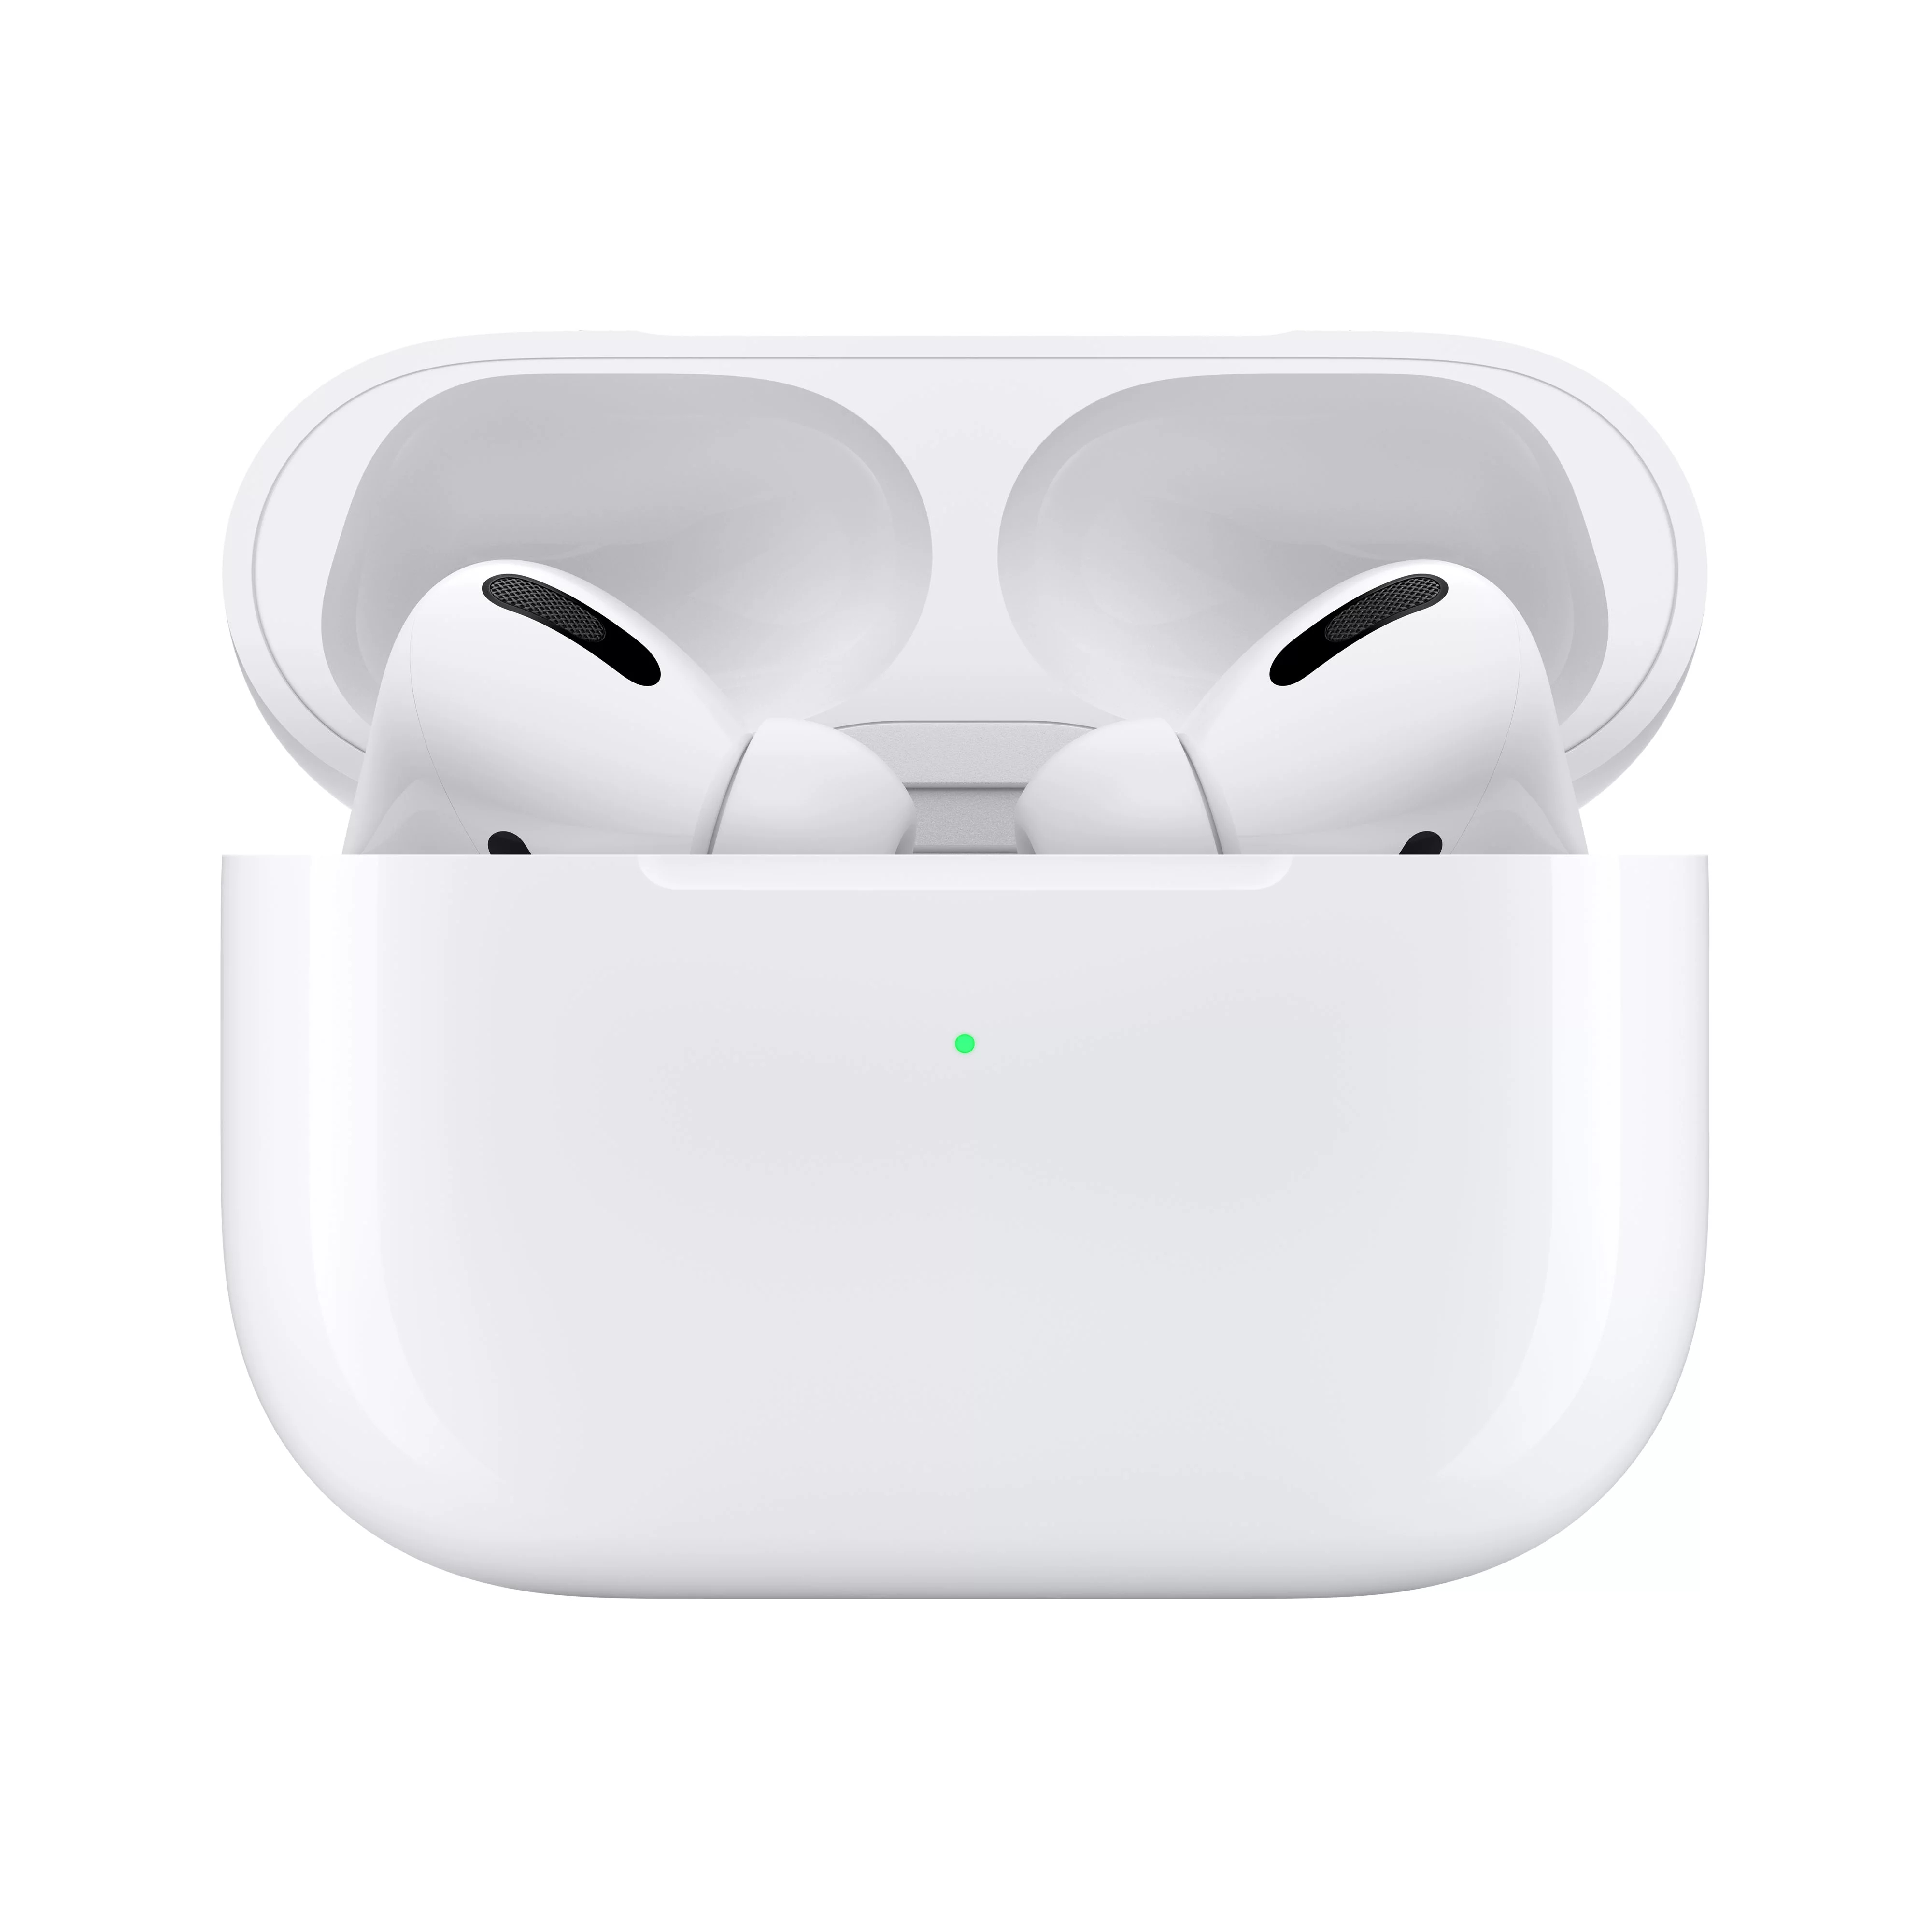 Apple AirPods are pictured in their case